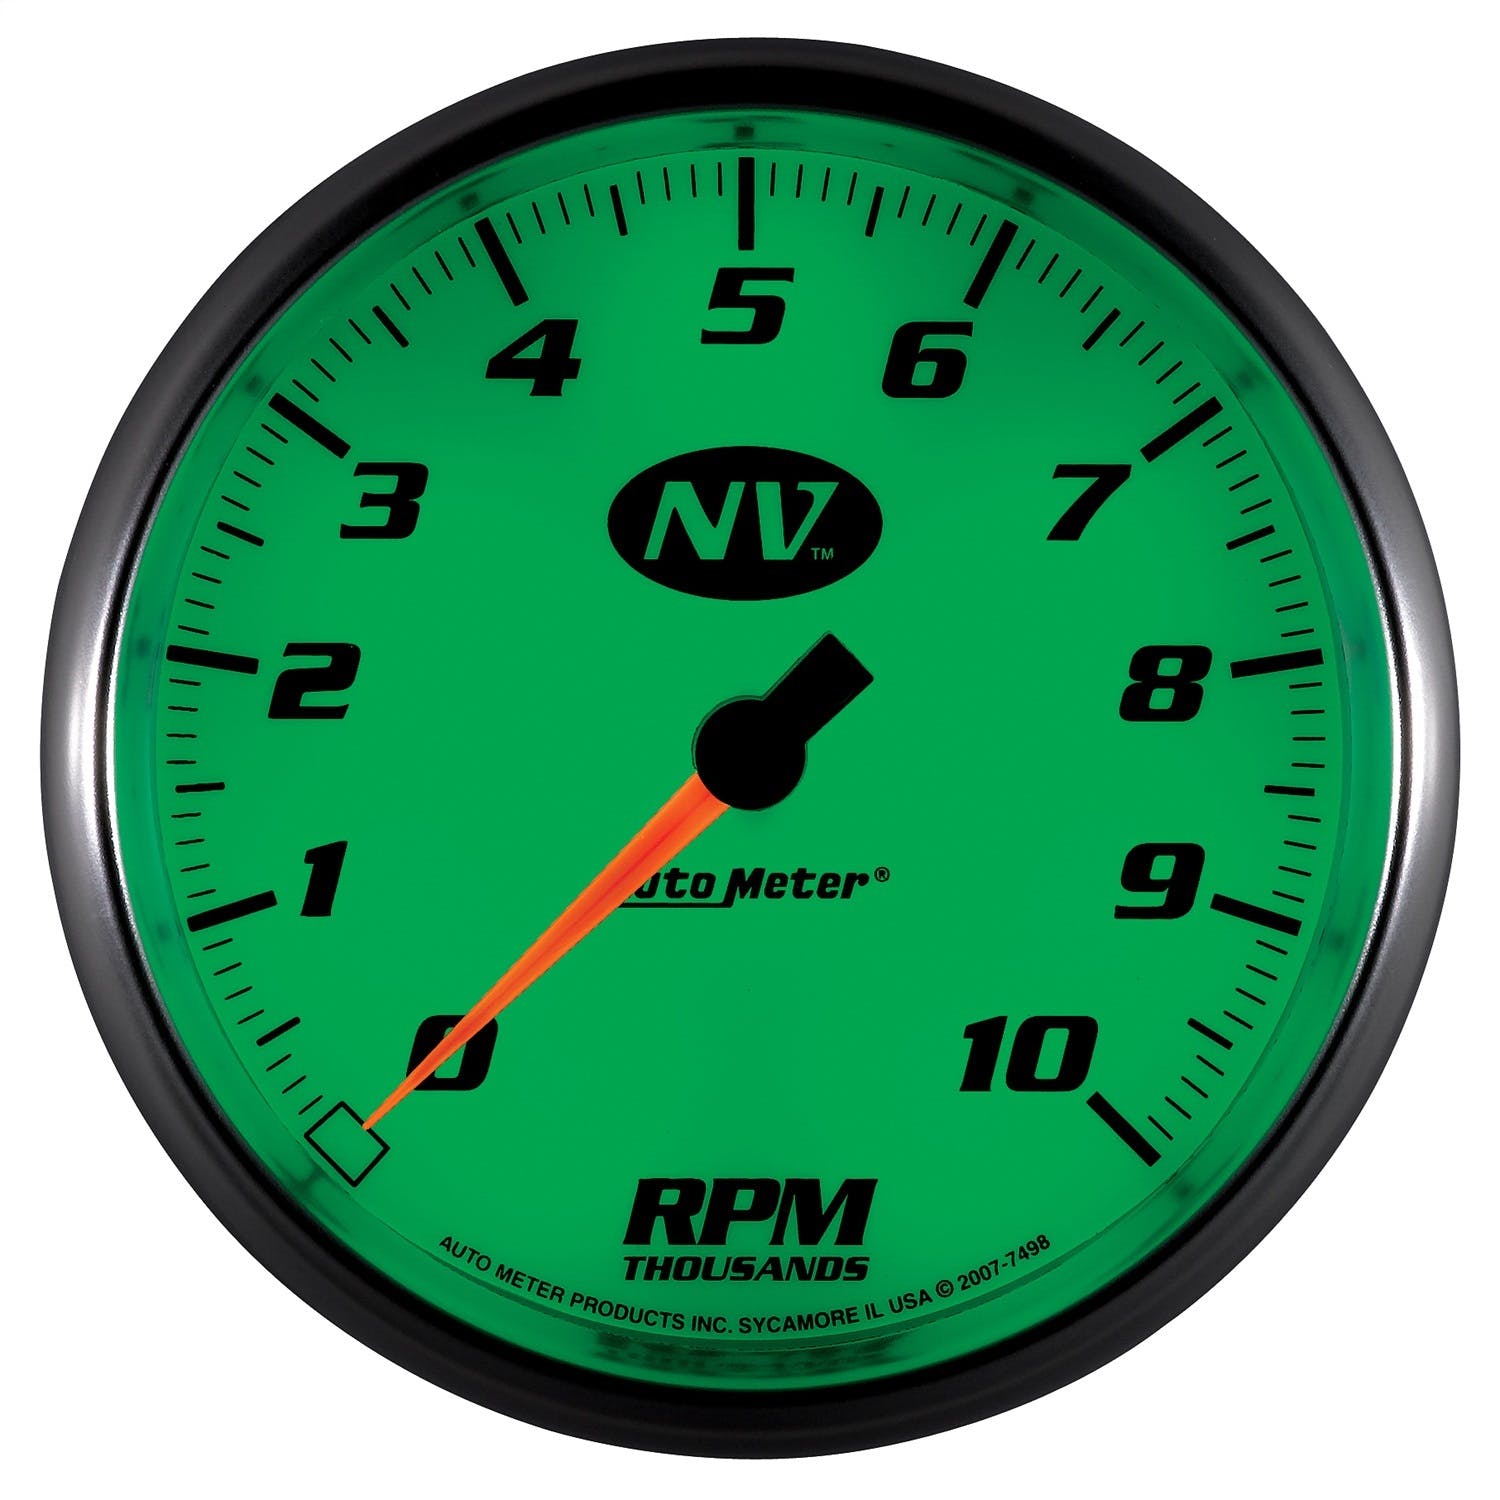 AutoMeter Products 7498 5in Tach, 10,000 Rpm, In- Dash Nv